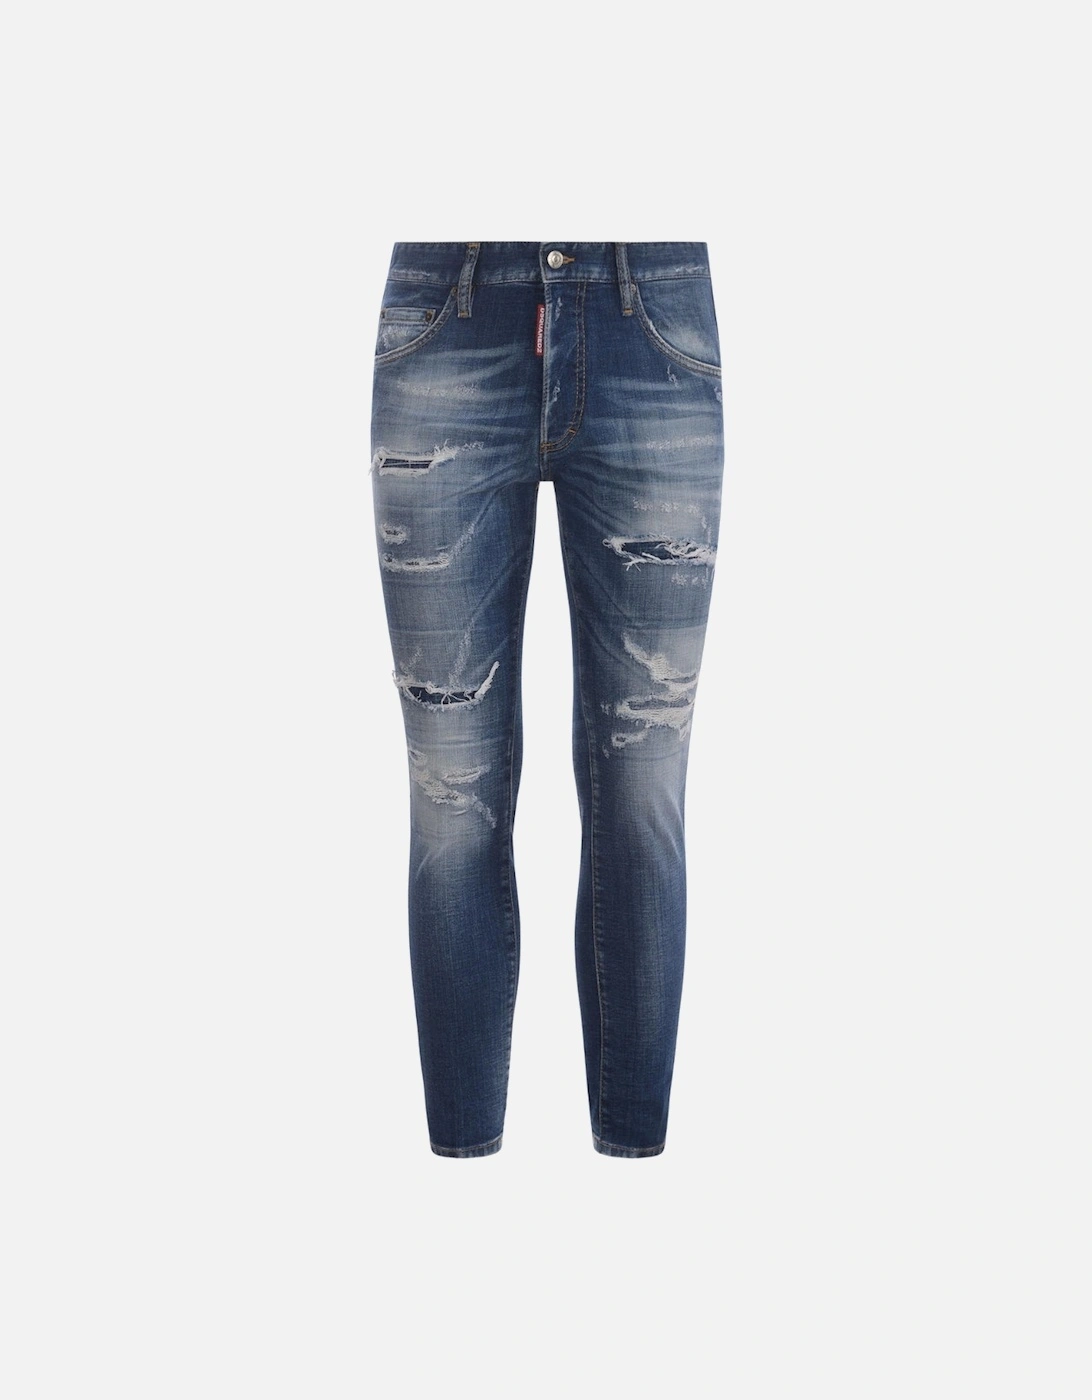 Skater Jean Distressed Faded Ripped Jeans, 3 of 2